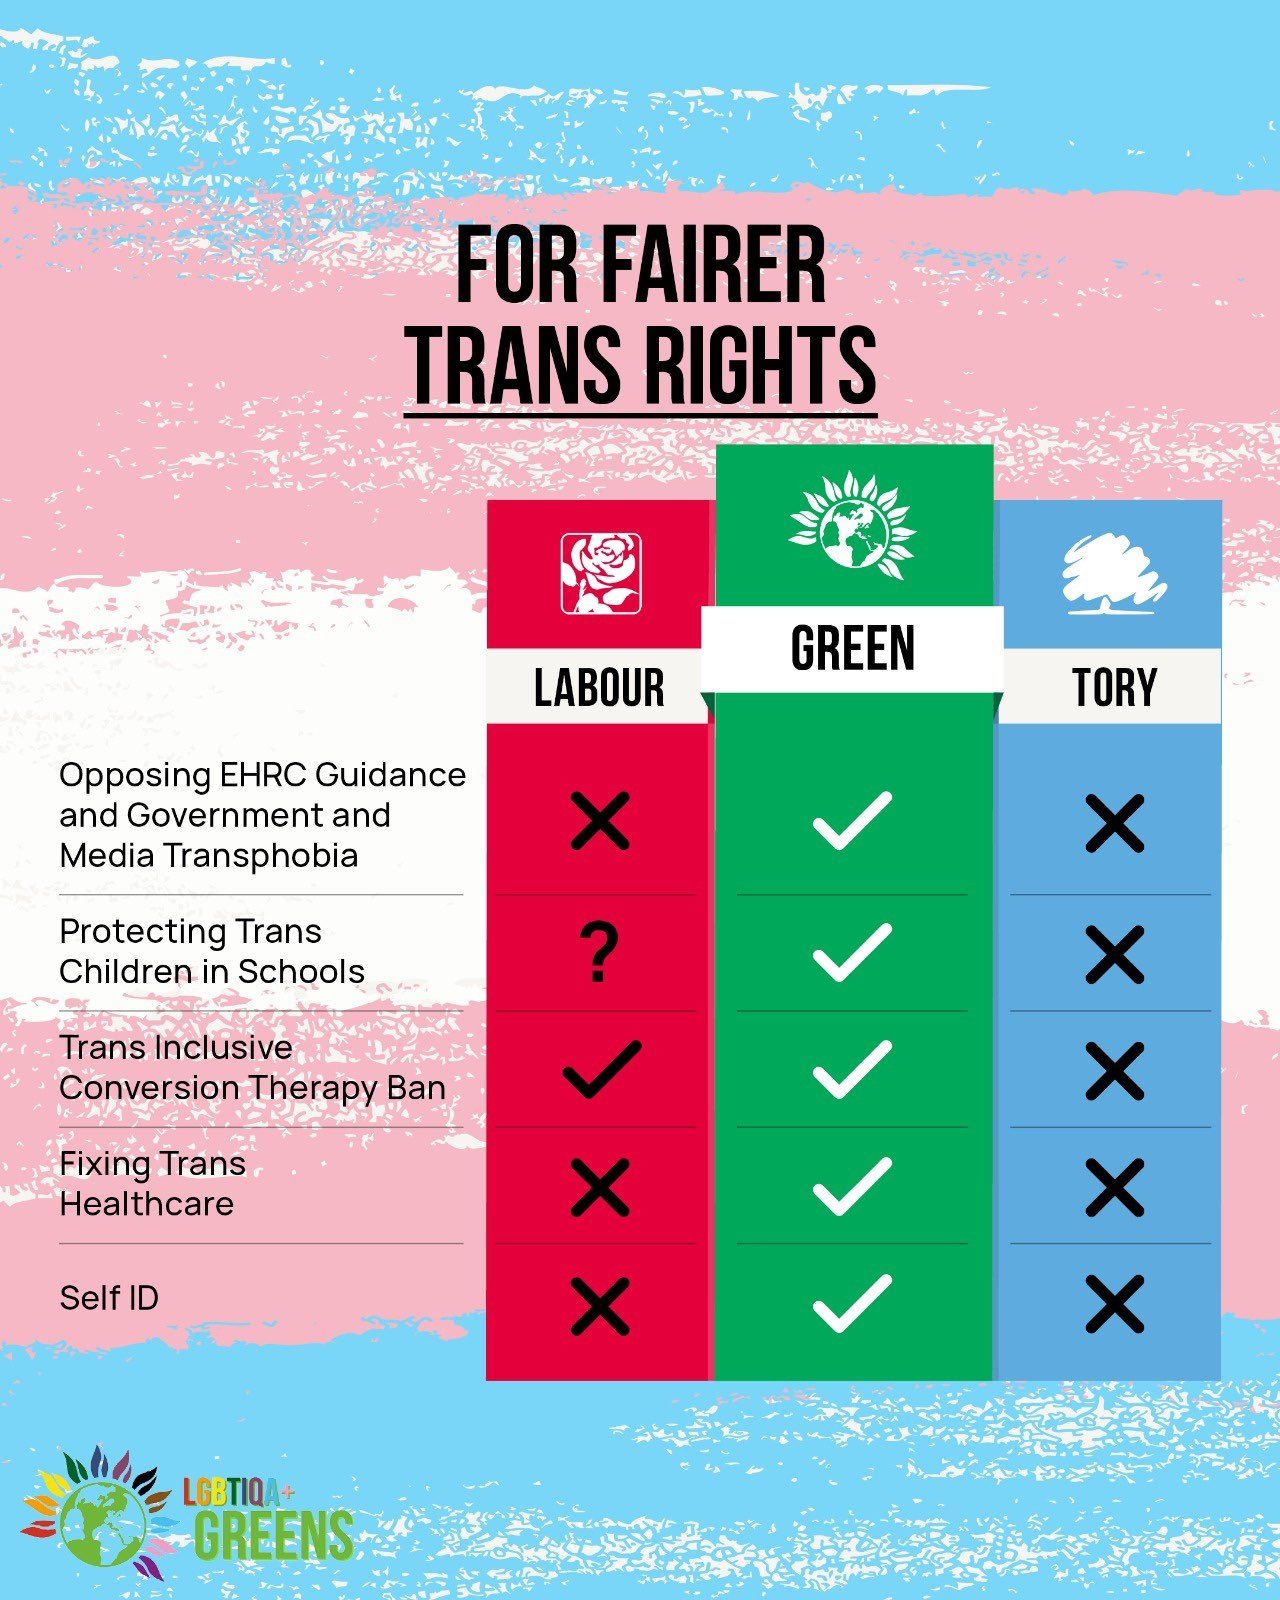 Green Policies shown against the (lack of) Labour and Tory polcies for equality and trans rights